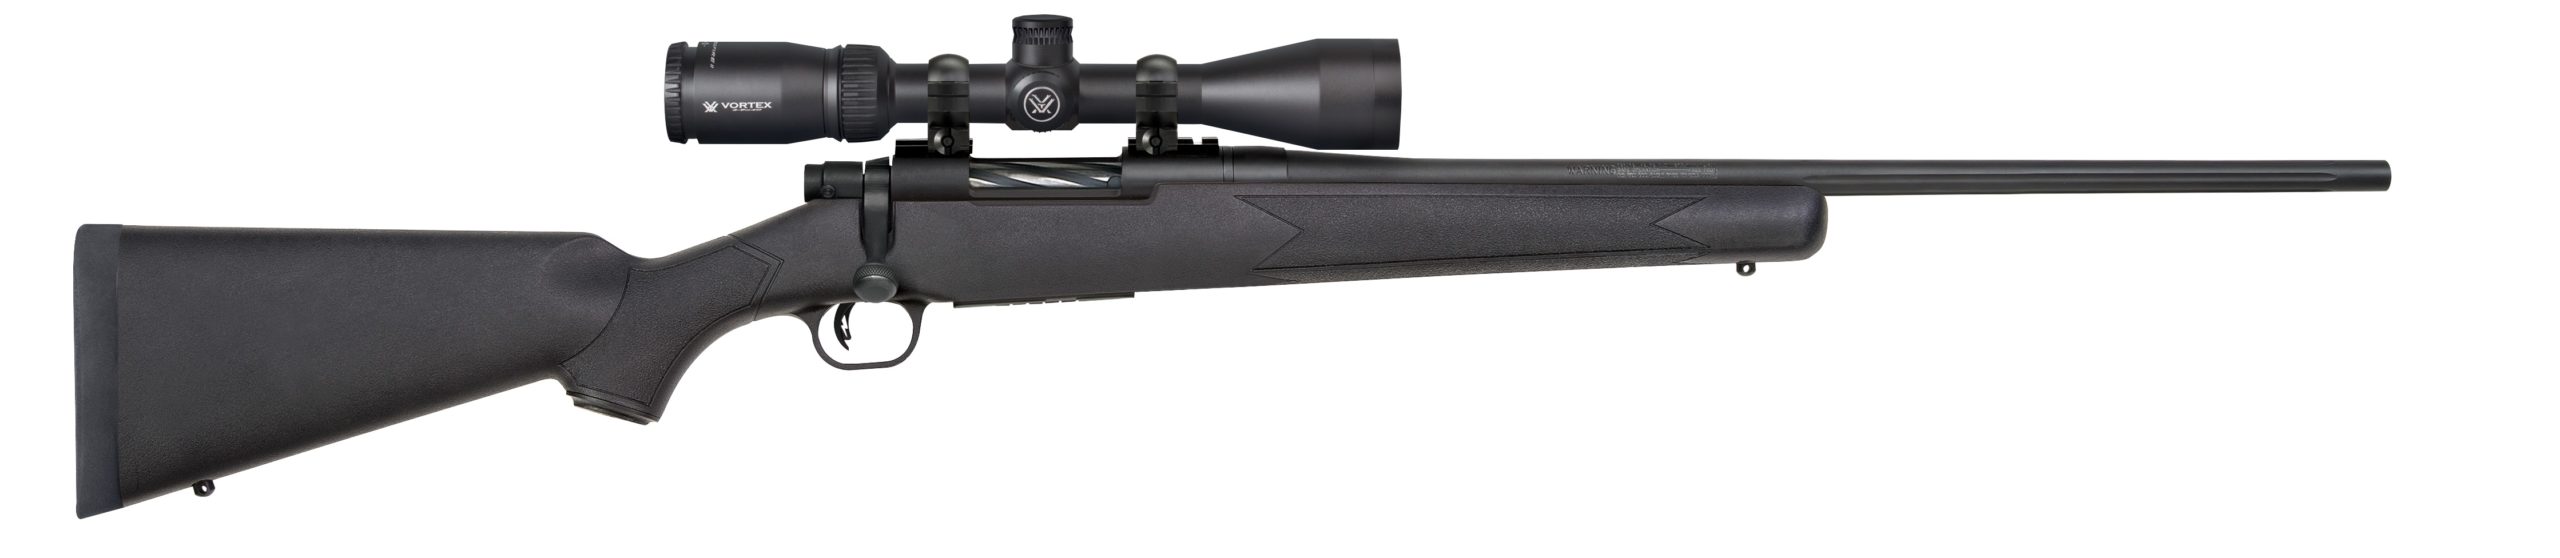 A Mossberg rifle chambered for 22-250 Remington